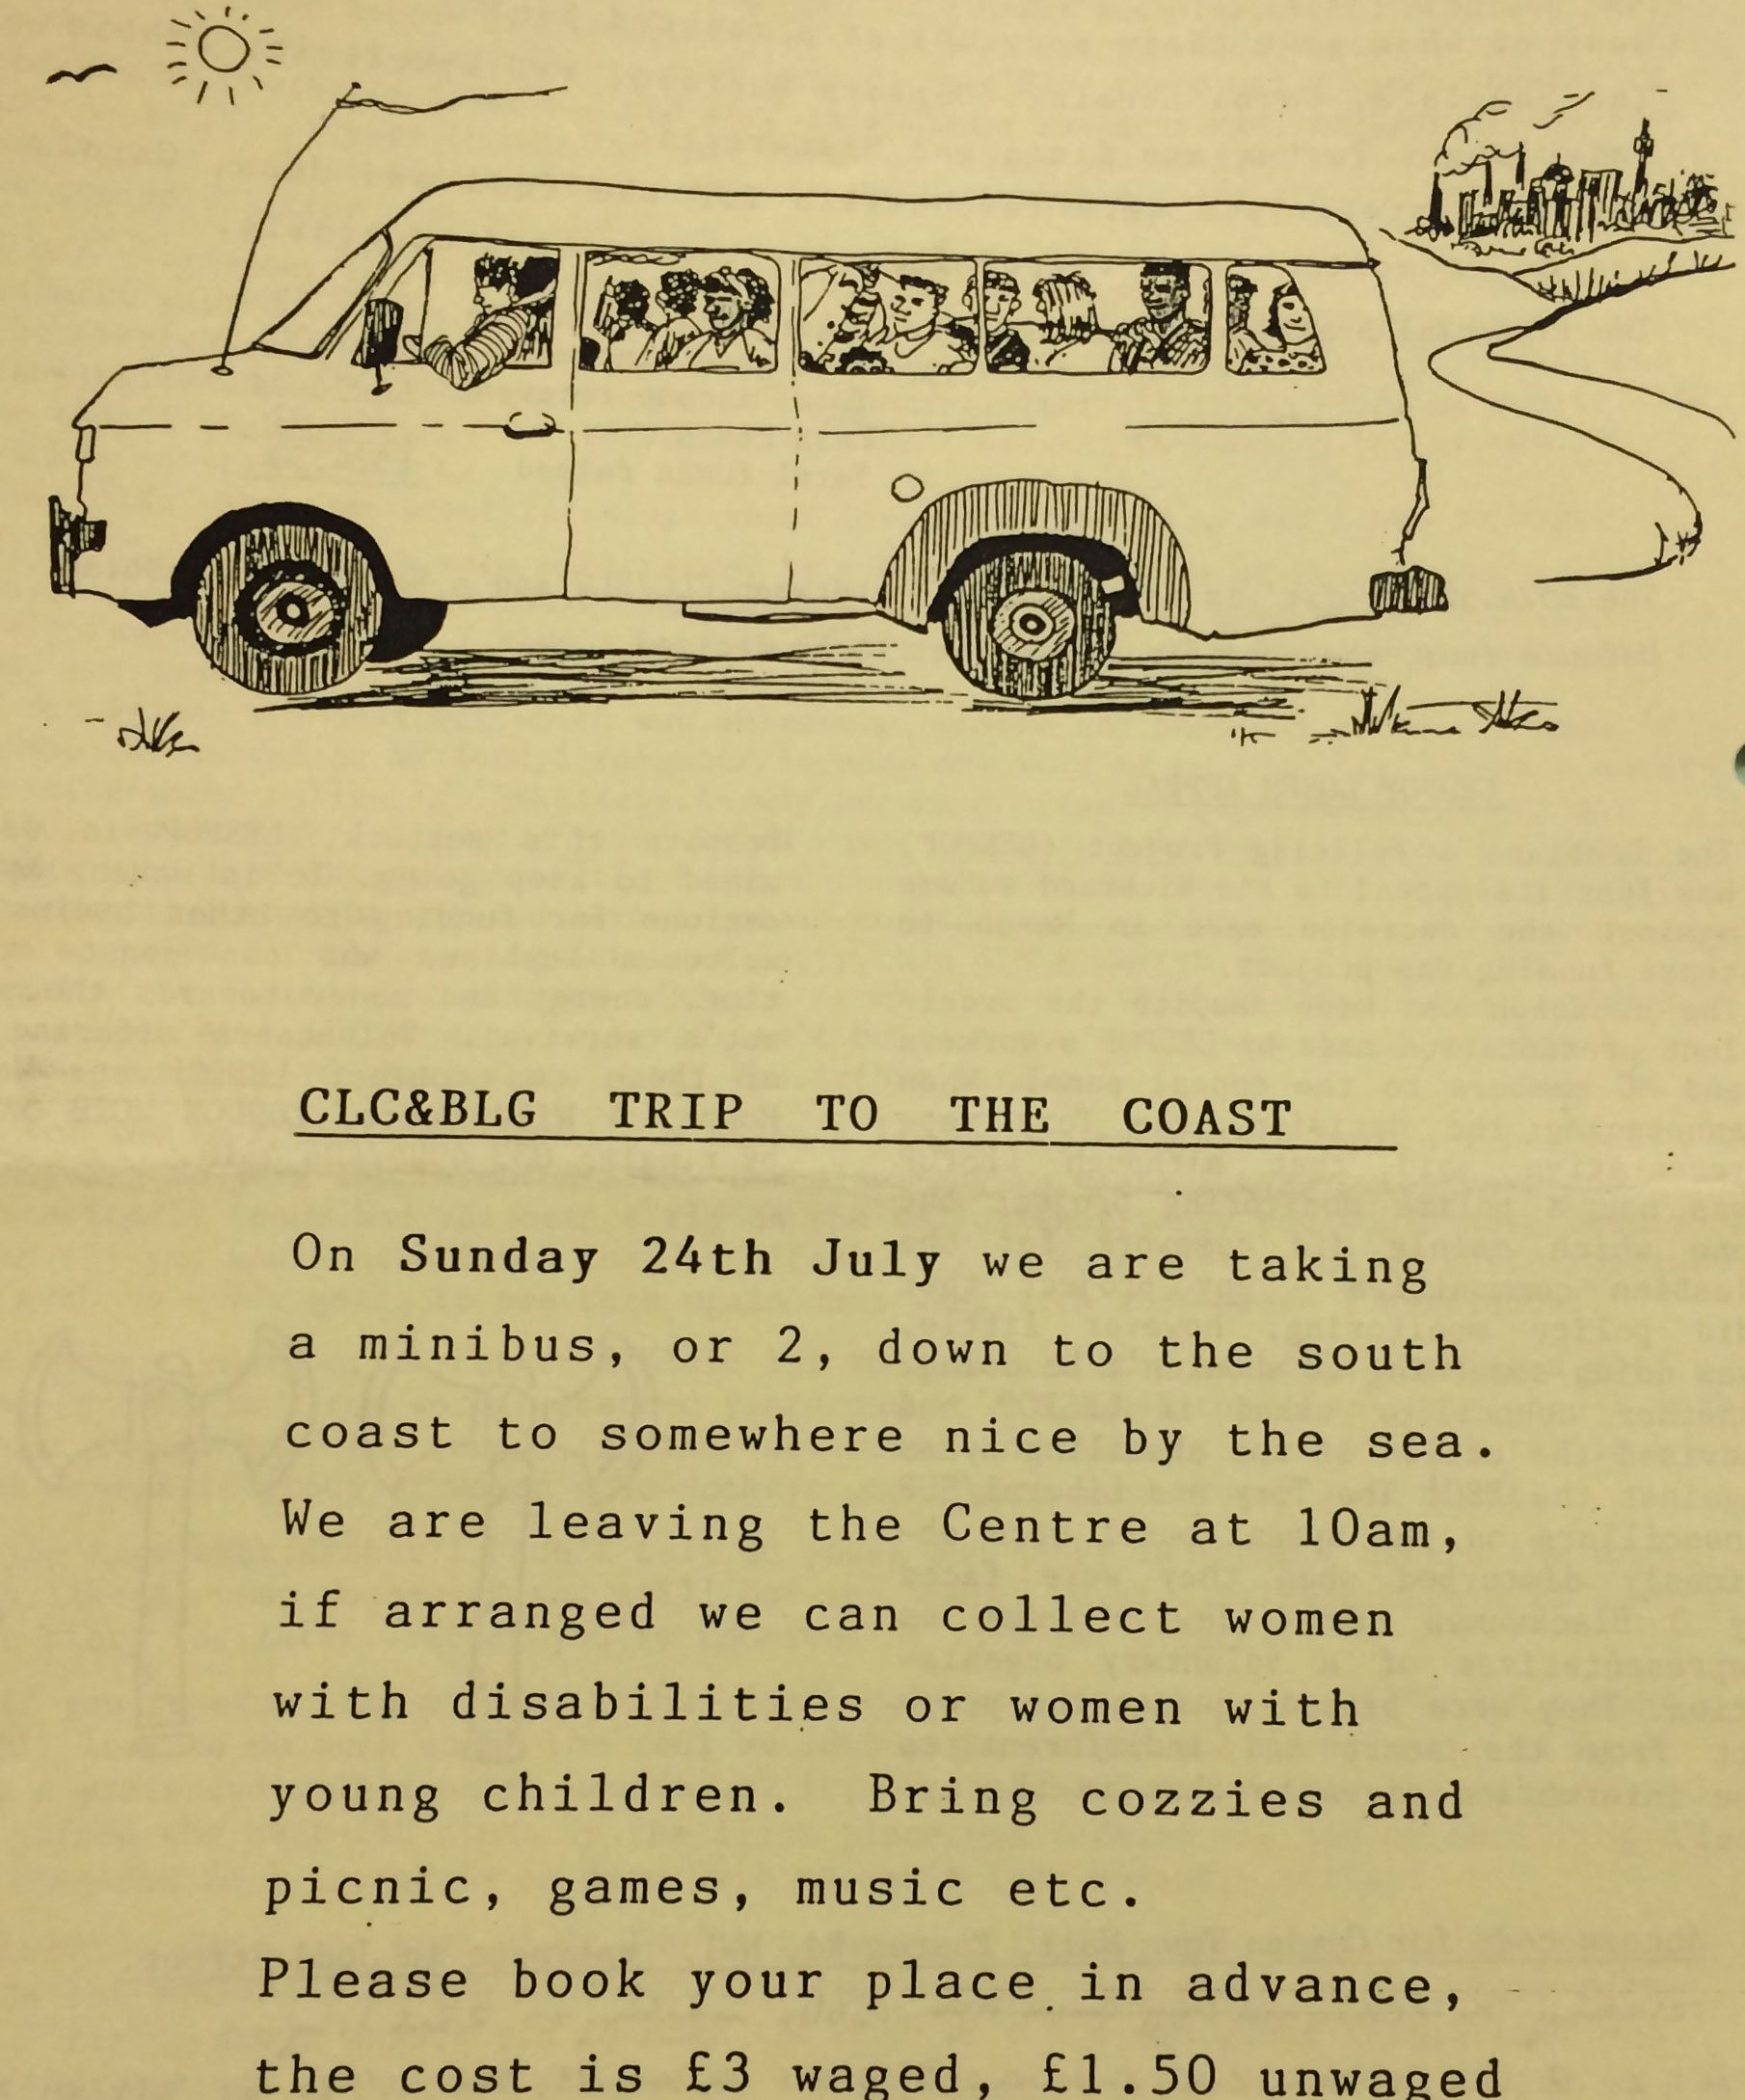 Image shows just the illustration at the top of the leaflet pictuing a mini-bus full of people leaving the city and driving in the direction of sunshine and a seagull.